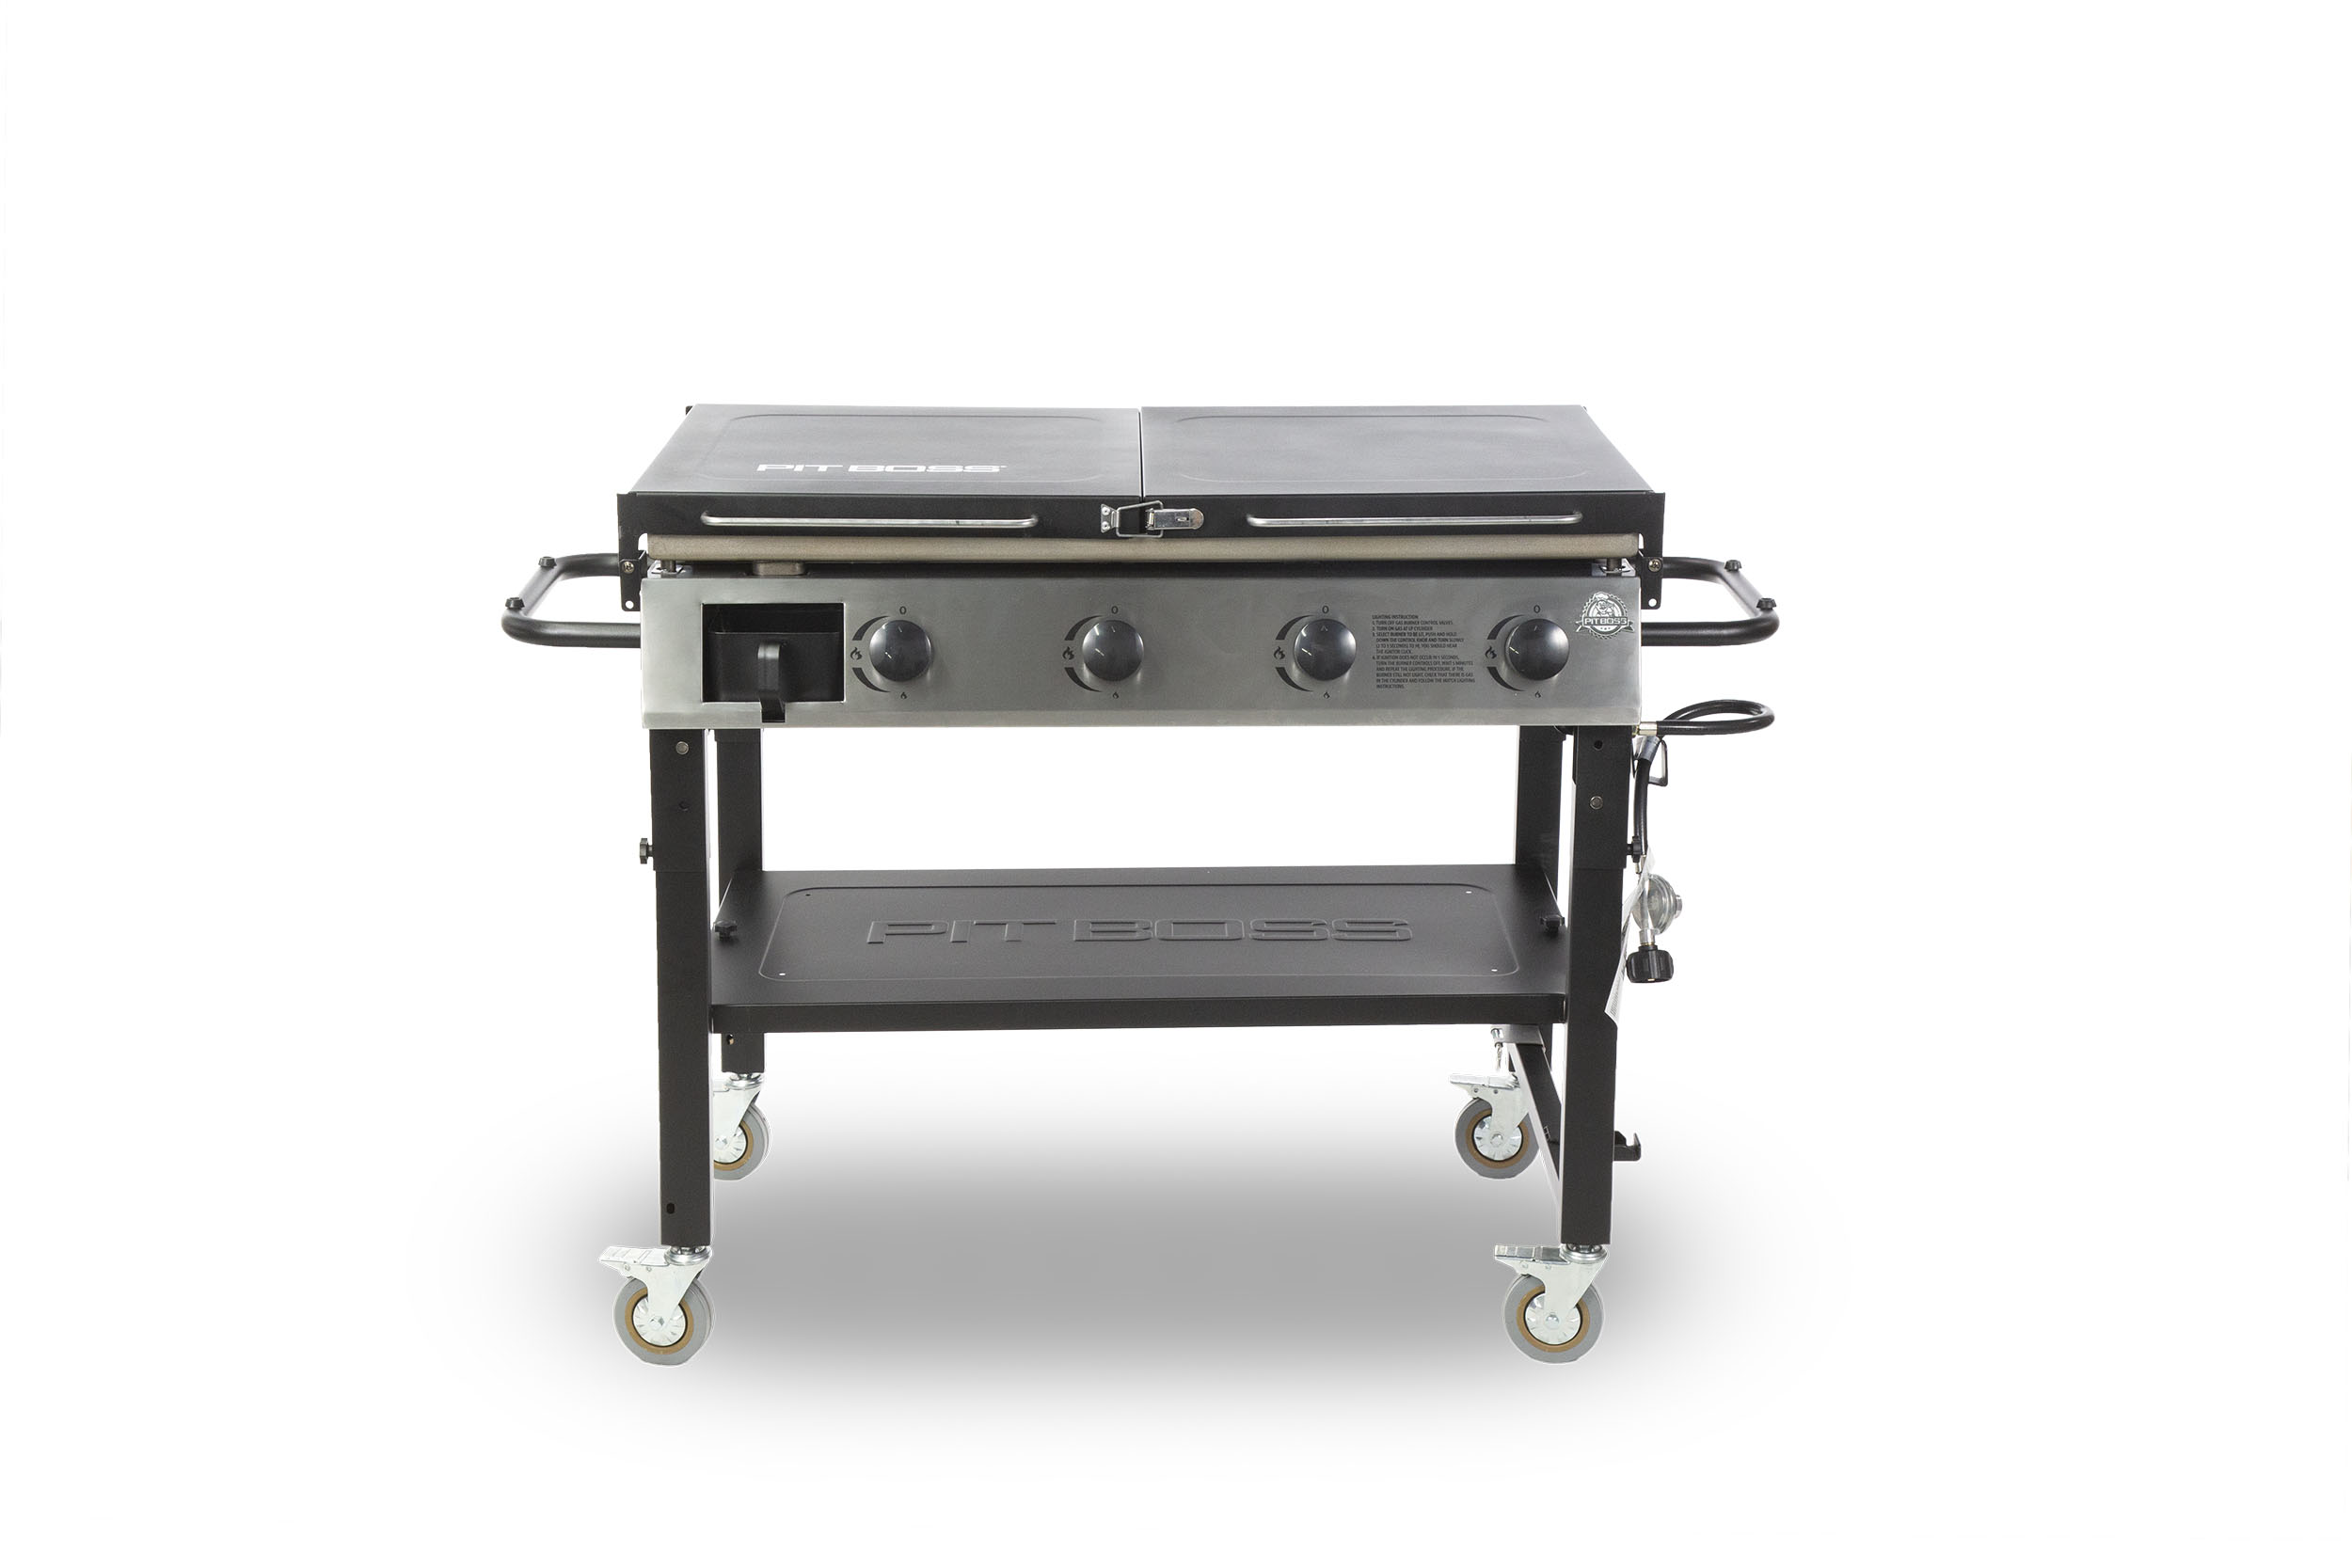 Pit Boss Deluxe 4-Burner Griddle w/ 2 Folding Side Shelves and Cover - PB757GD - image 2 of 6